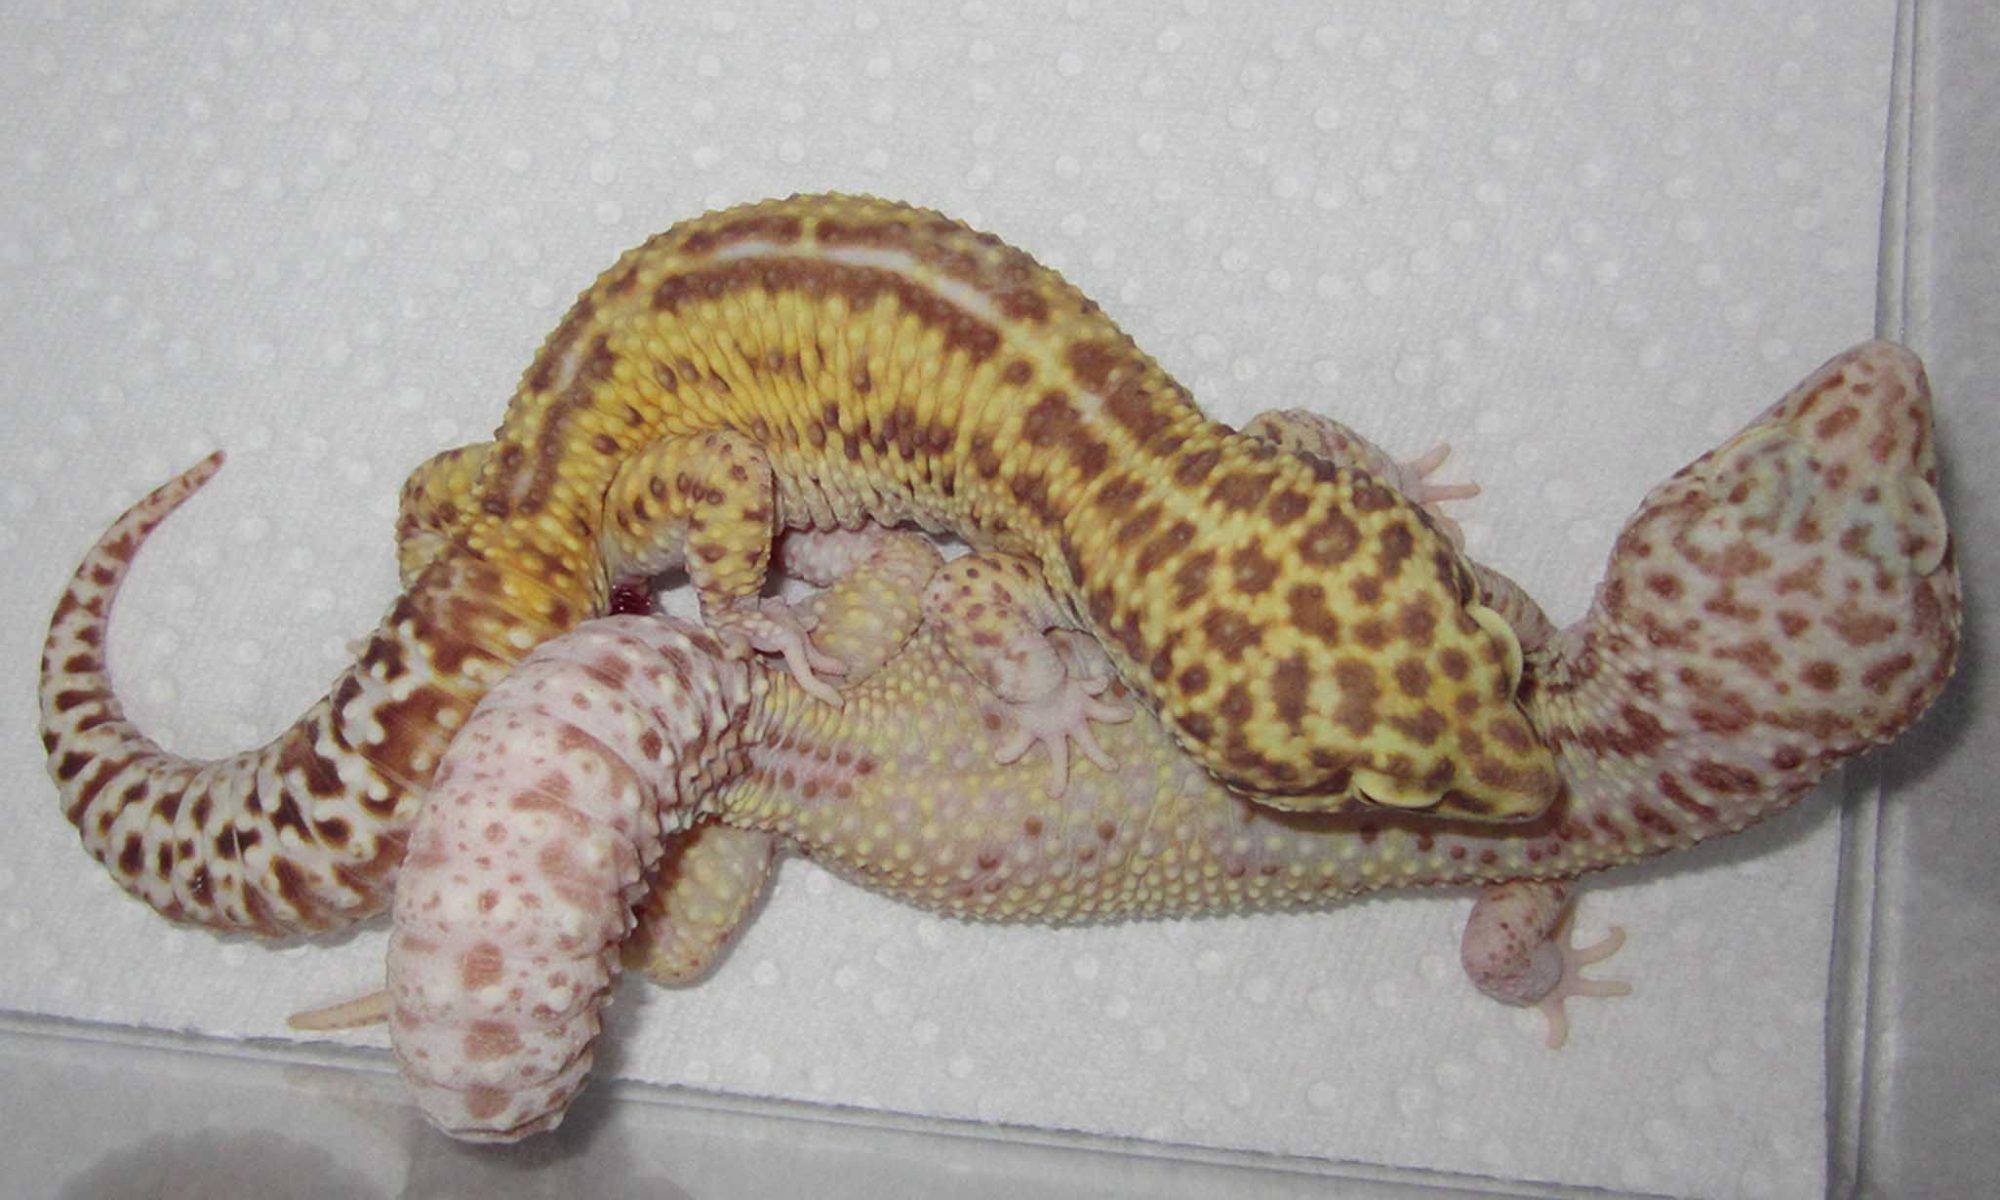 leopard gecko won't breed mating problems